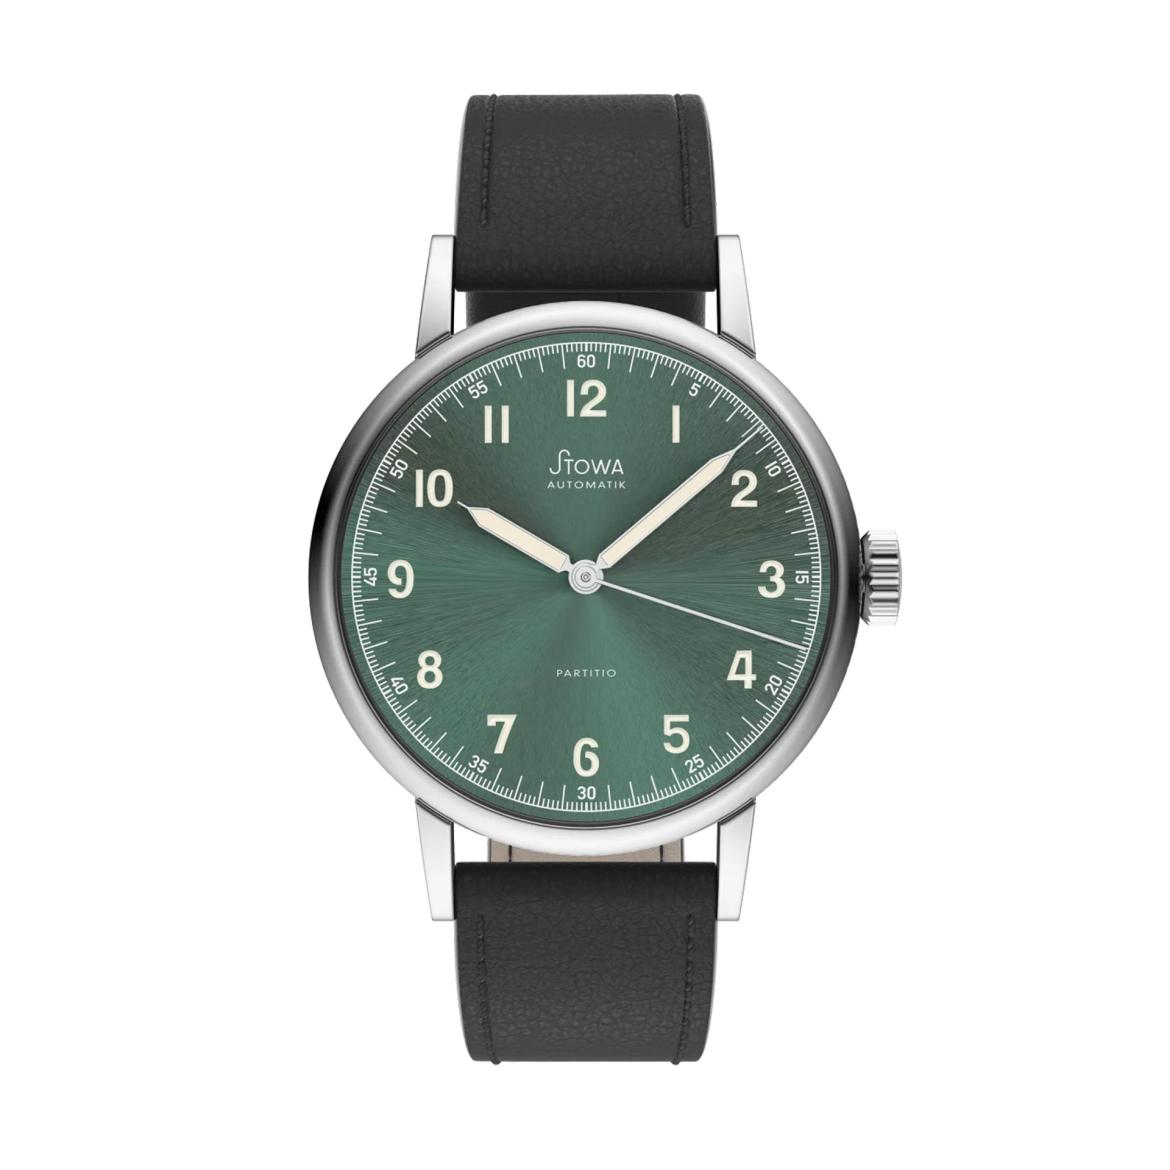 Stowa Partitio Green Limited